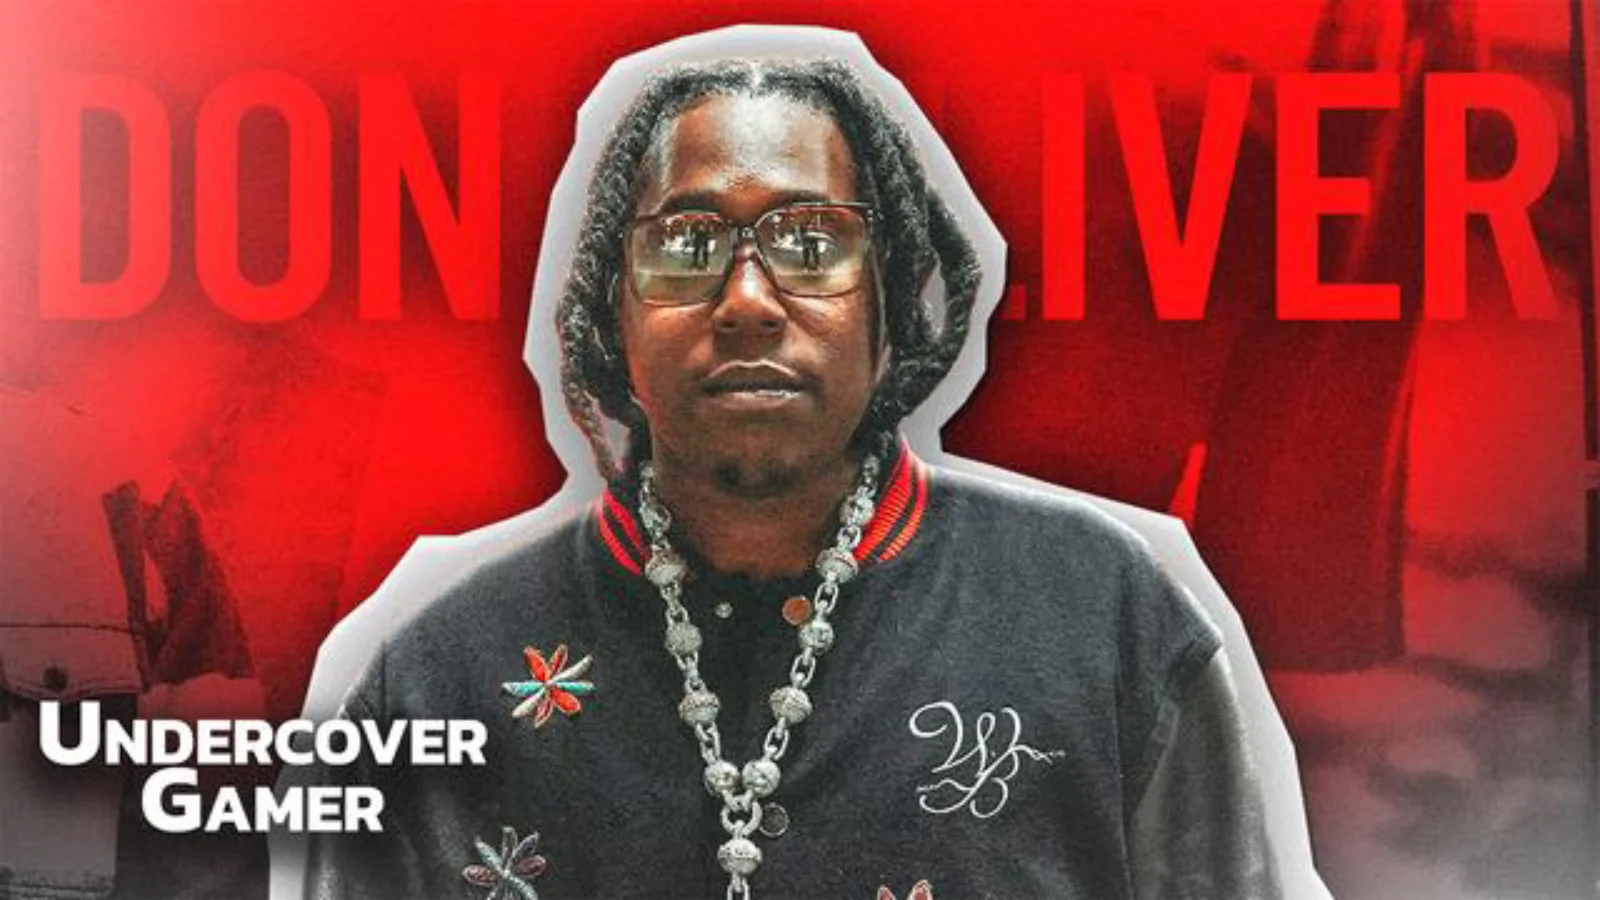 Interview with rapper Don Toliver: how gaming has influenced his music career